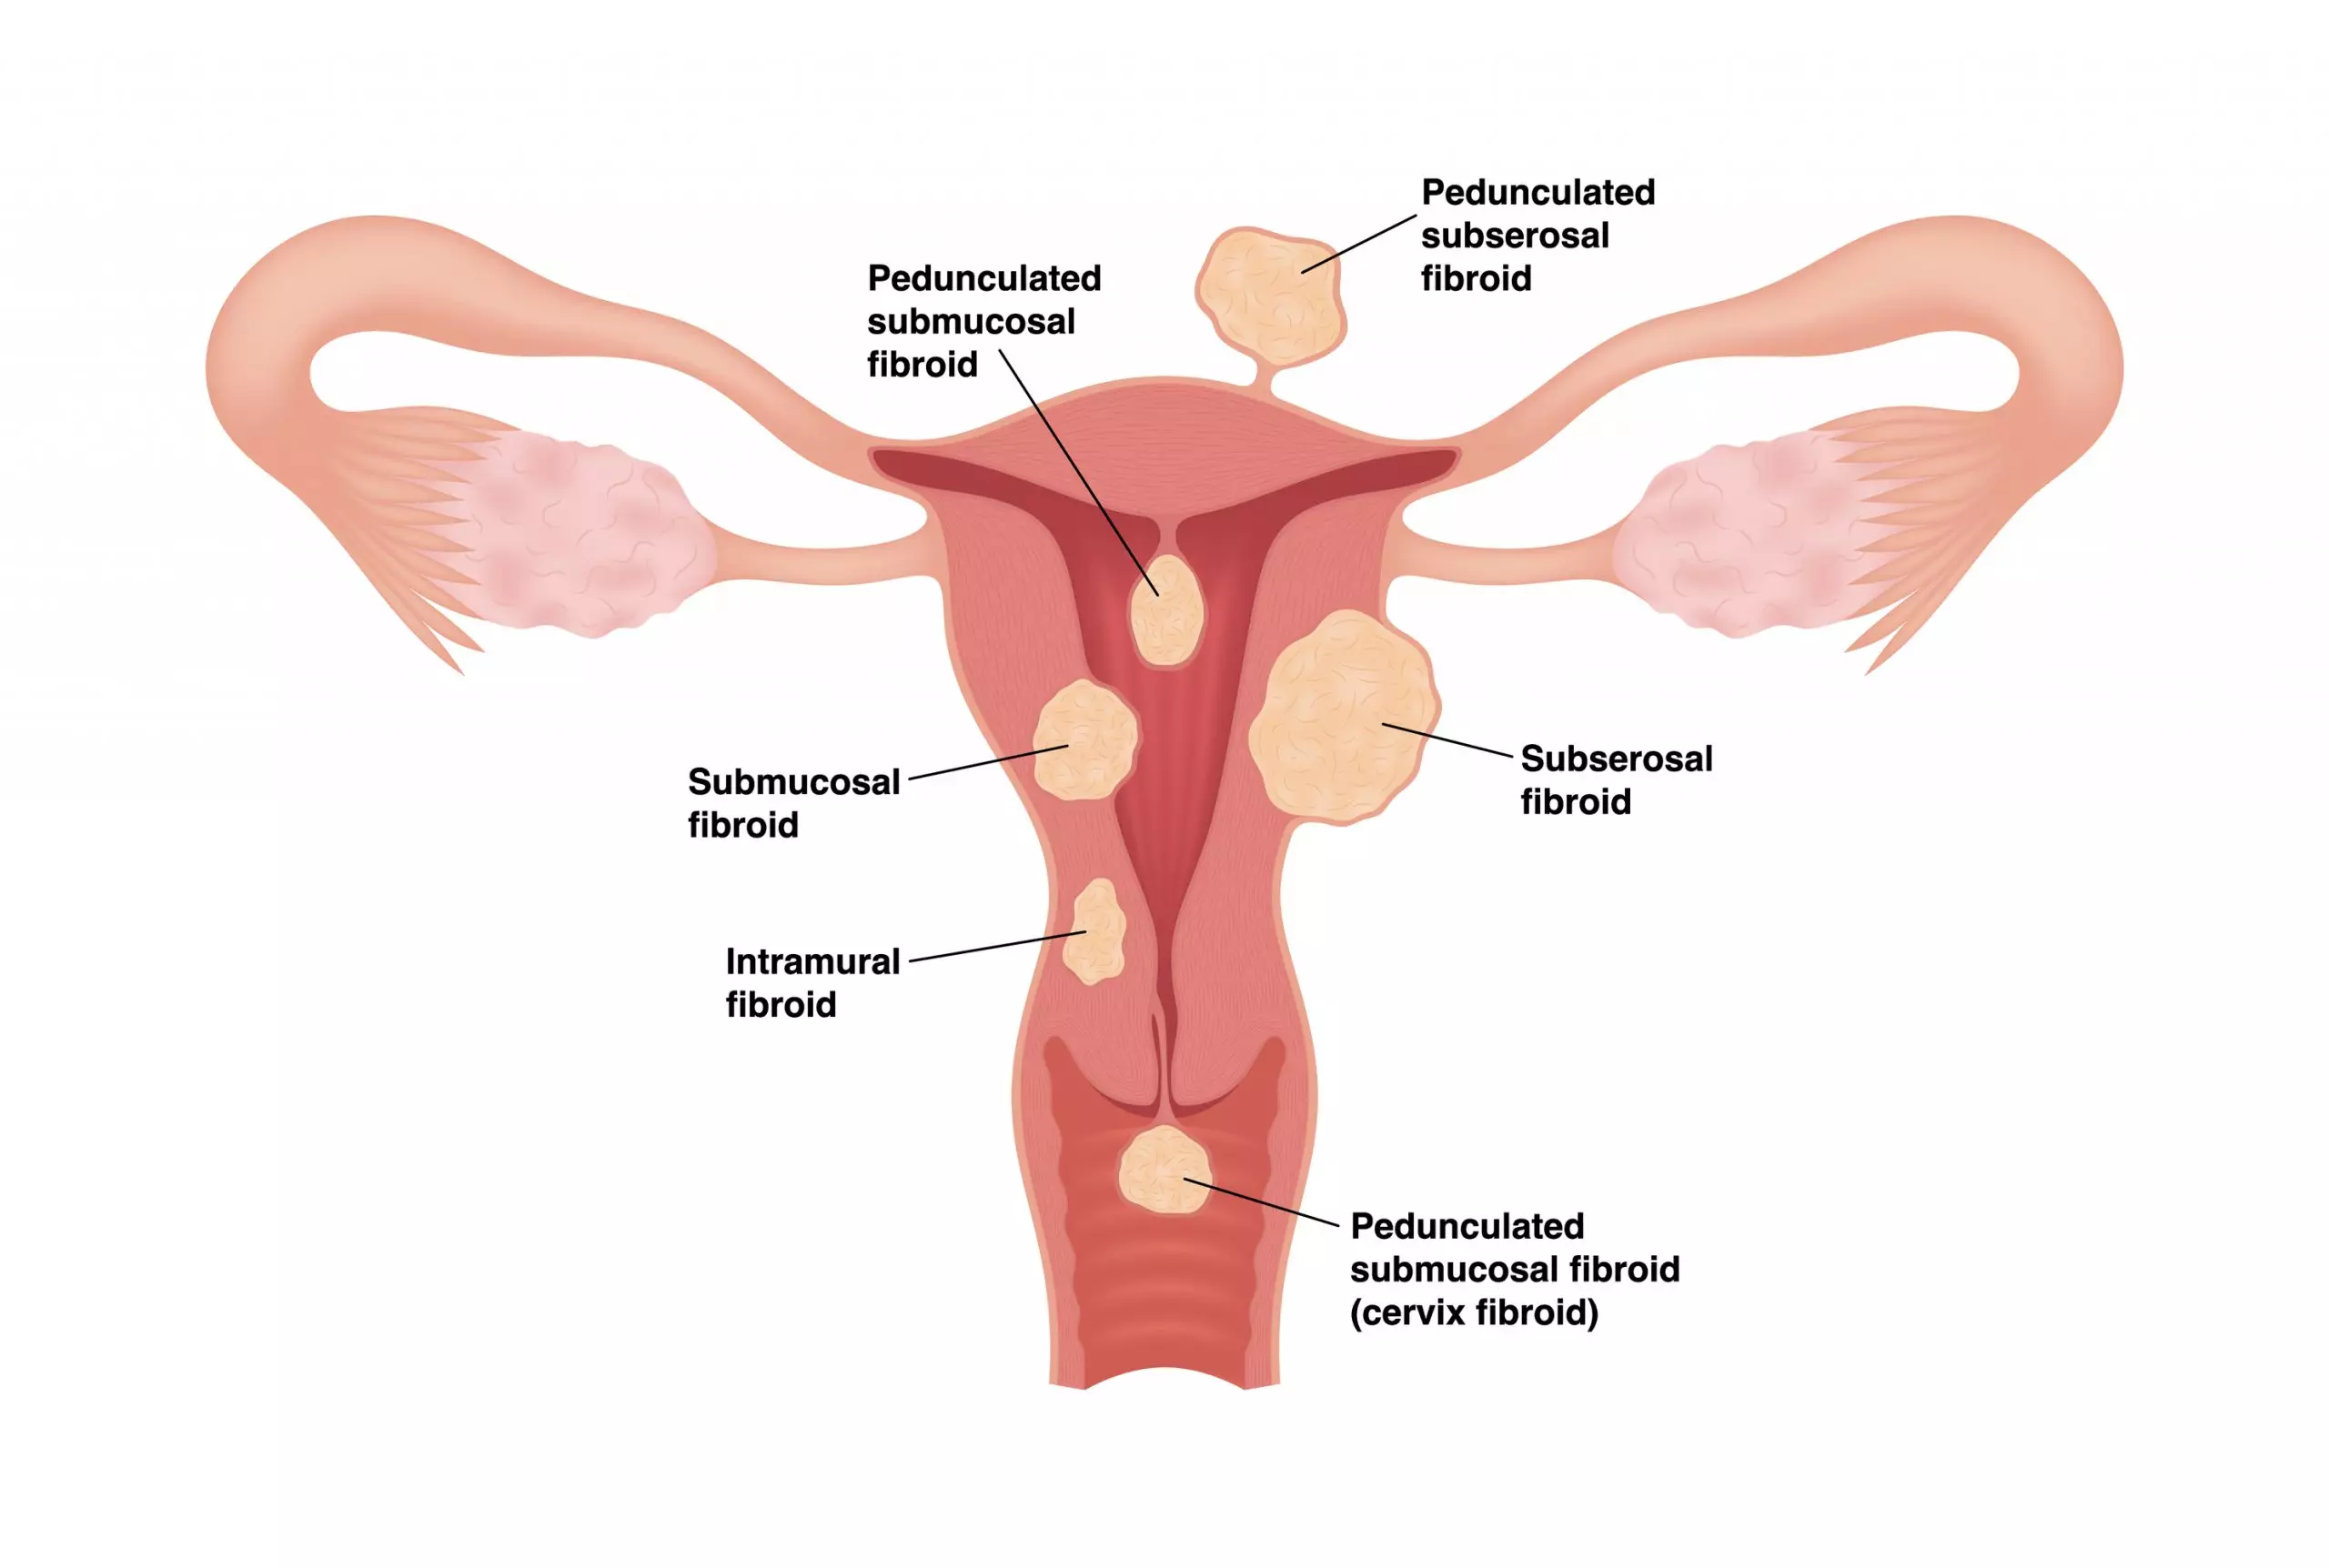 Illustration of the different types of uterine fibroids